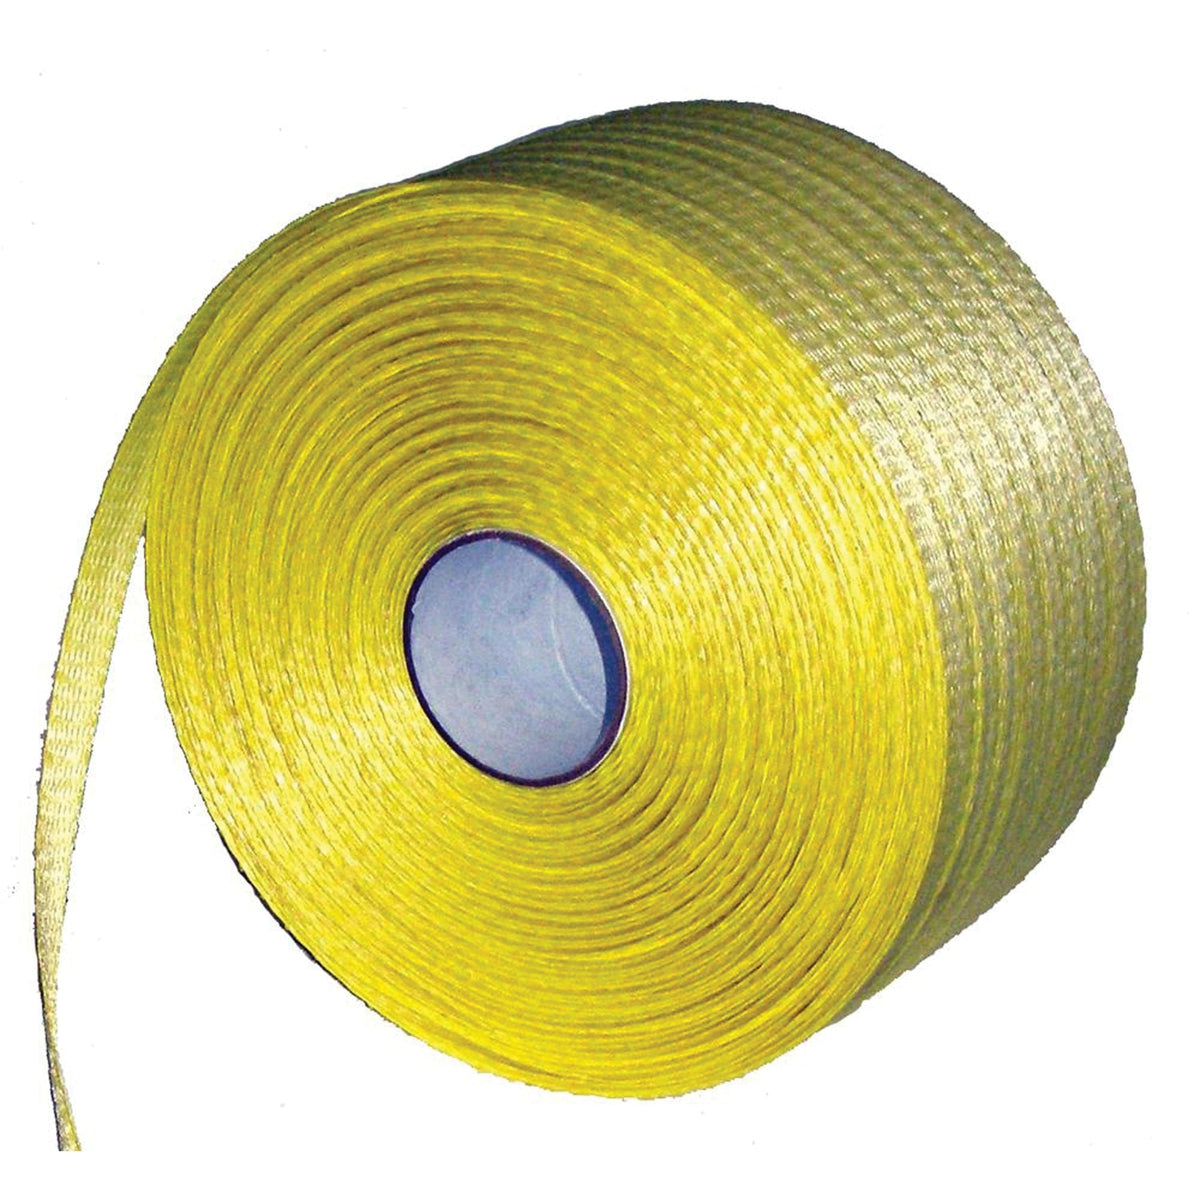 Dr. Shrink Qualifies for Free Shipping Dr. Shrink 1/2" x 1500' Heavy-Duty Strap #DS-50015HD